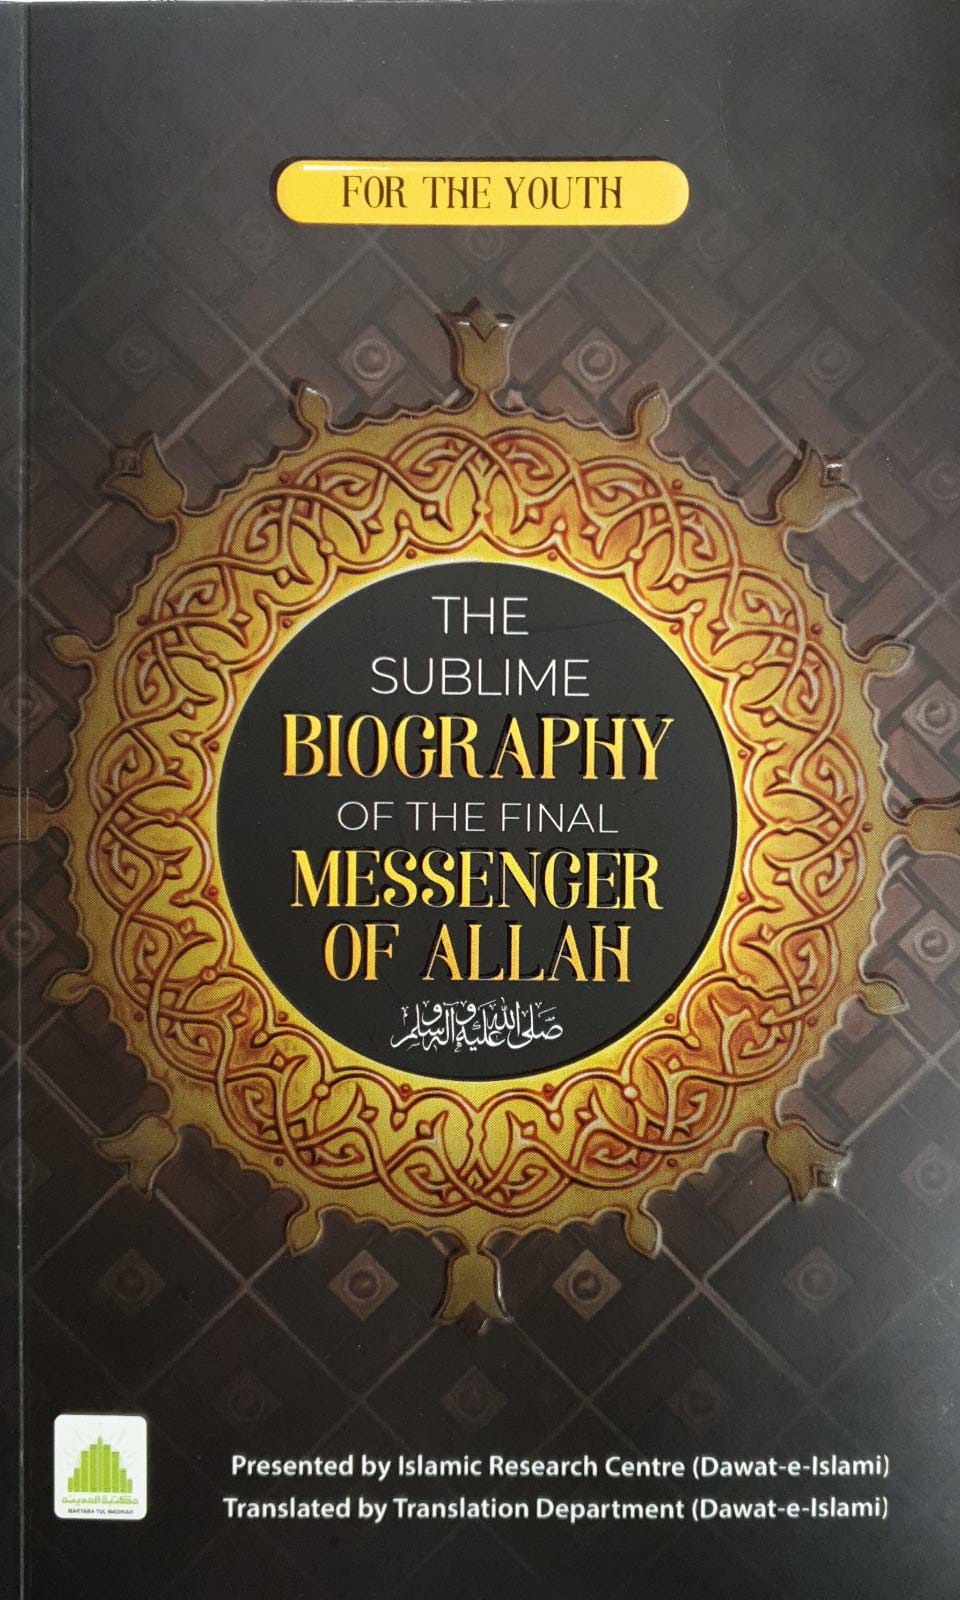 The sublime Biography of the Final Messenger of Allah